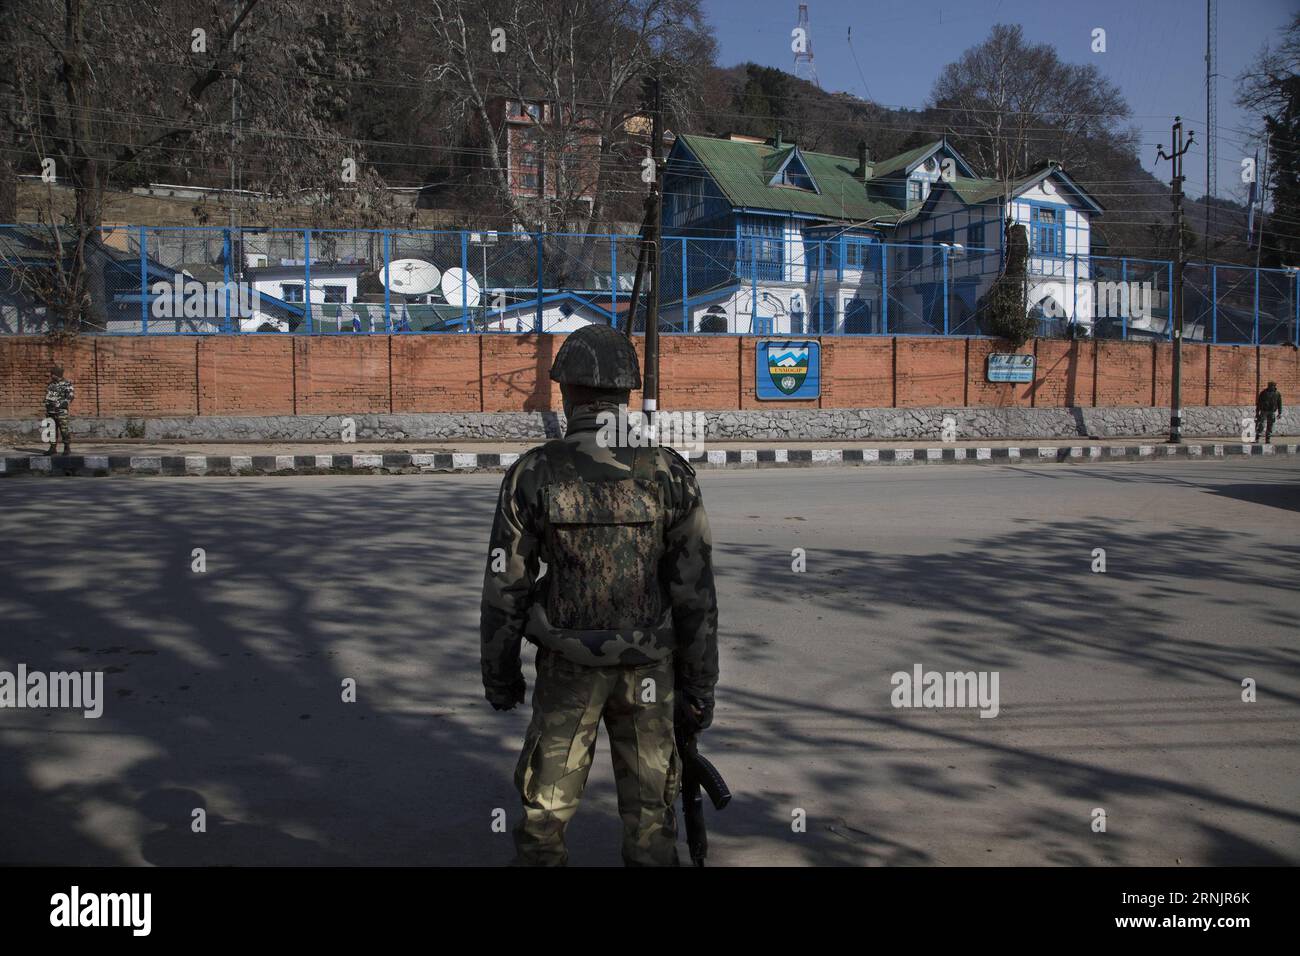 170210) -- SRINAGAR, Feb. 10, 2017 -- Indian paramilitary troopers stand  guard outside the office of United Nations Military Observers Group in  India and Pakistan (UNMOGIP), in Srinagar, summer capital of  Indian-controlled